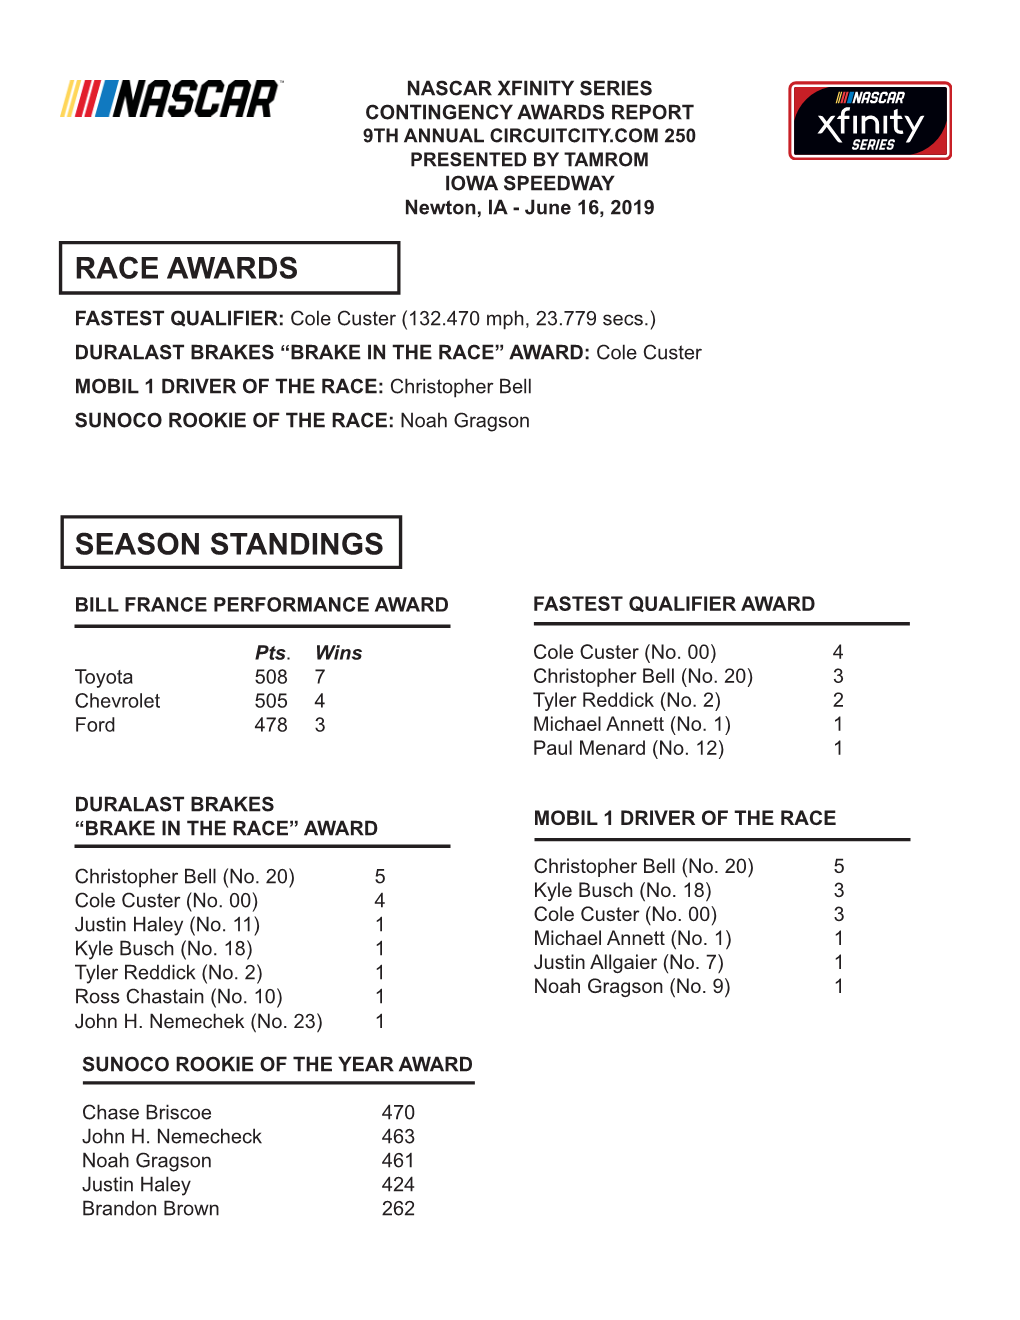 CONTINGENCY AWARDS REPORT 9TH ANNUAL CIRCUITCITY.COM 250 PRESENTED by TAMROM IOWA SPEEDWAY Newton, IA - June 16, 2019